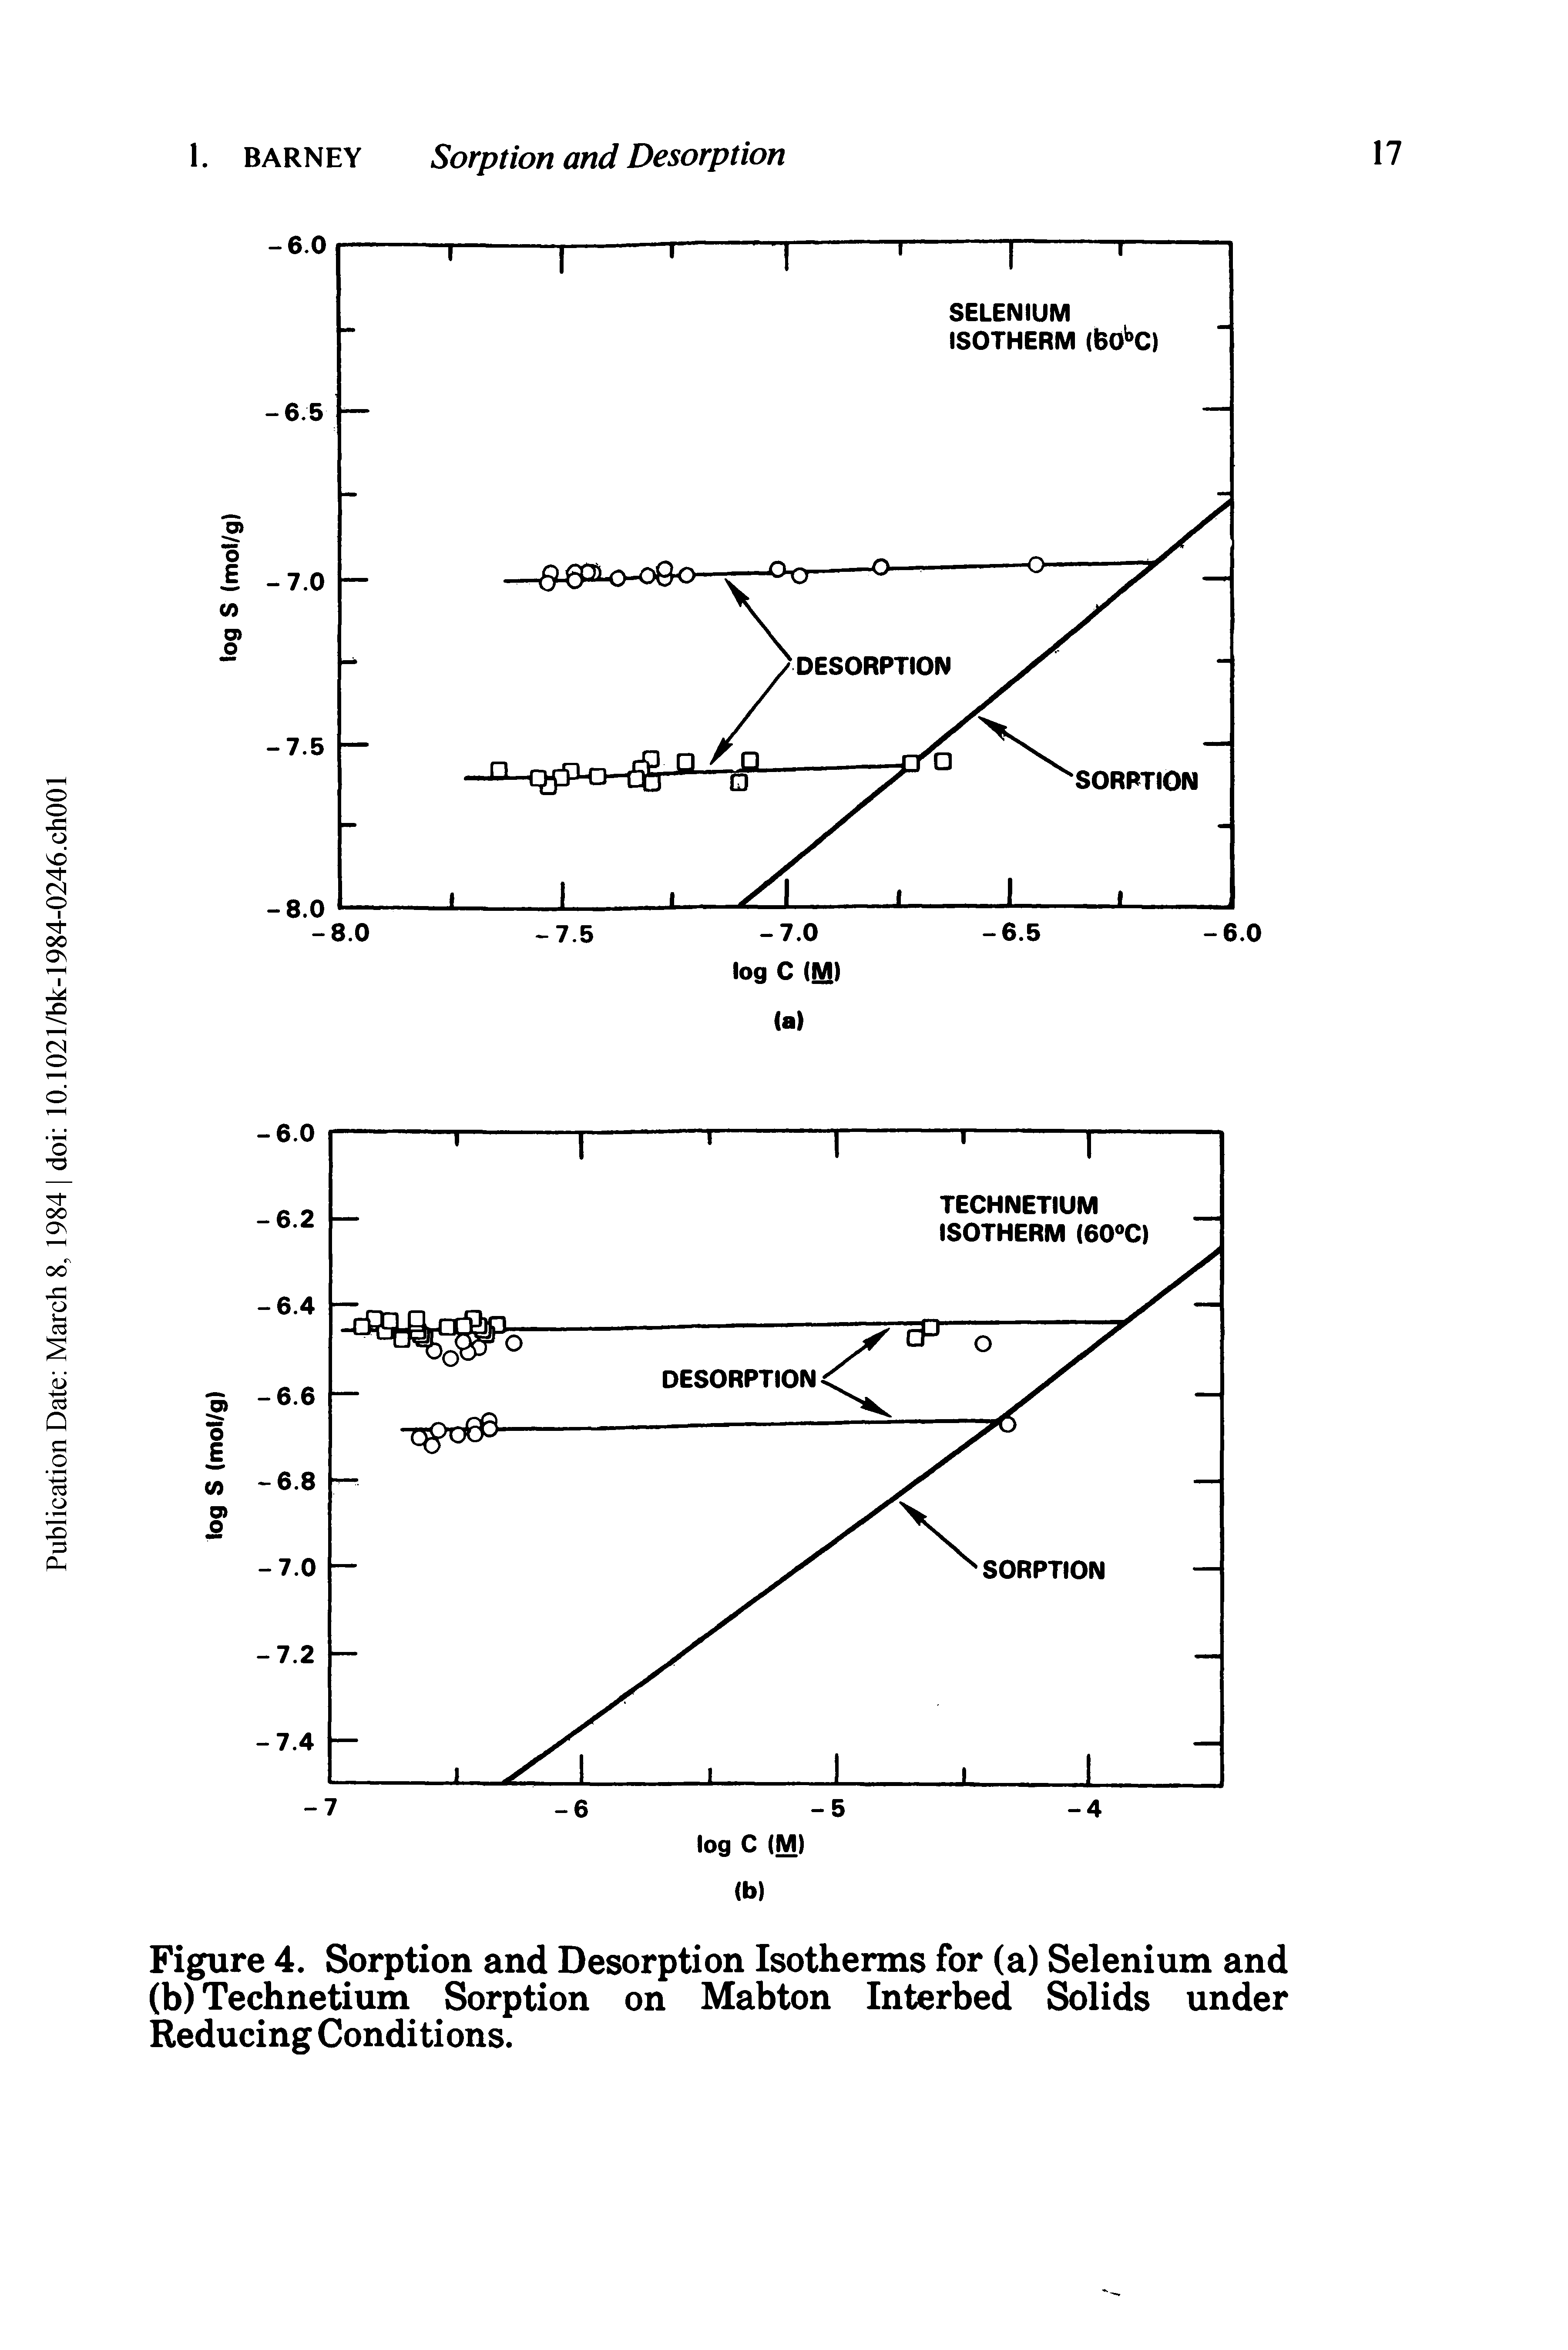 Figure 4. Sorption and Desorption Isotherms for (a) Selenium and (b) Technetium Sorption on Mabton Interbed Solids under Reducing Conditions.